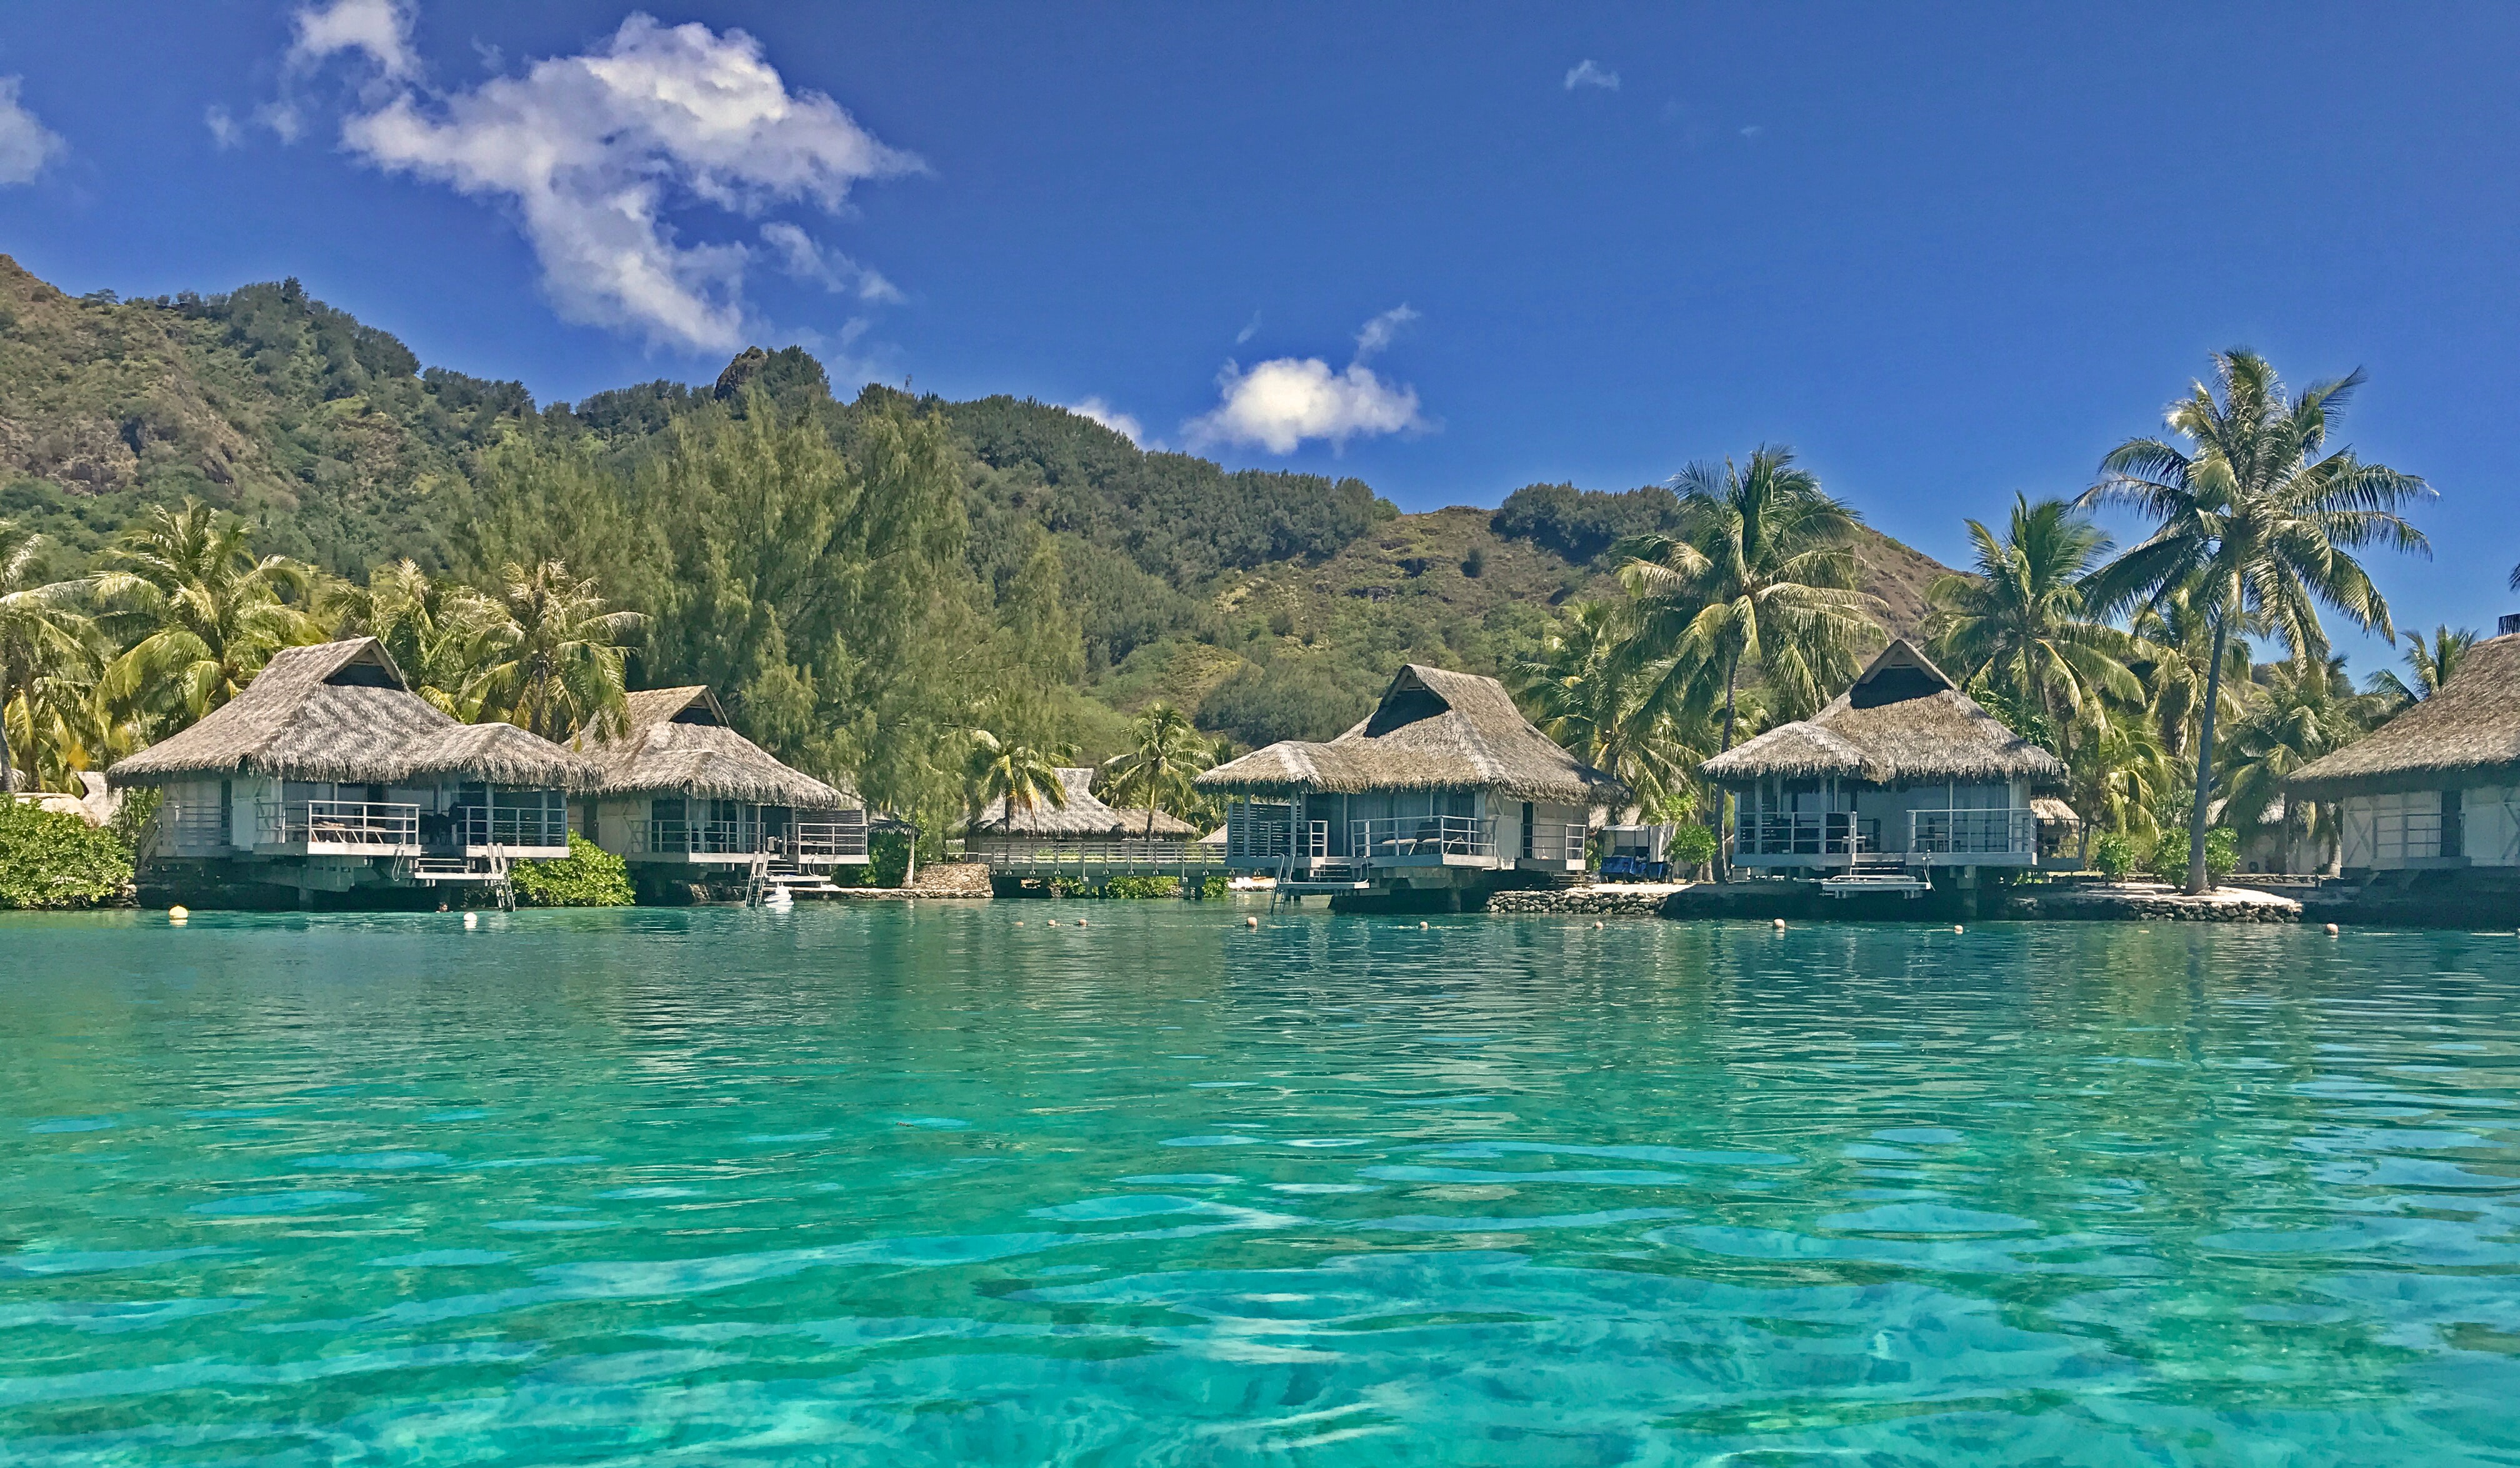 Explore the beautiful lagoons on the islands